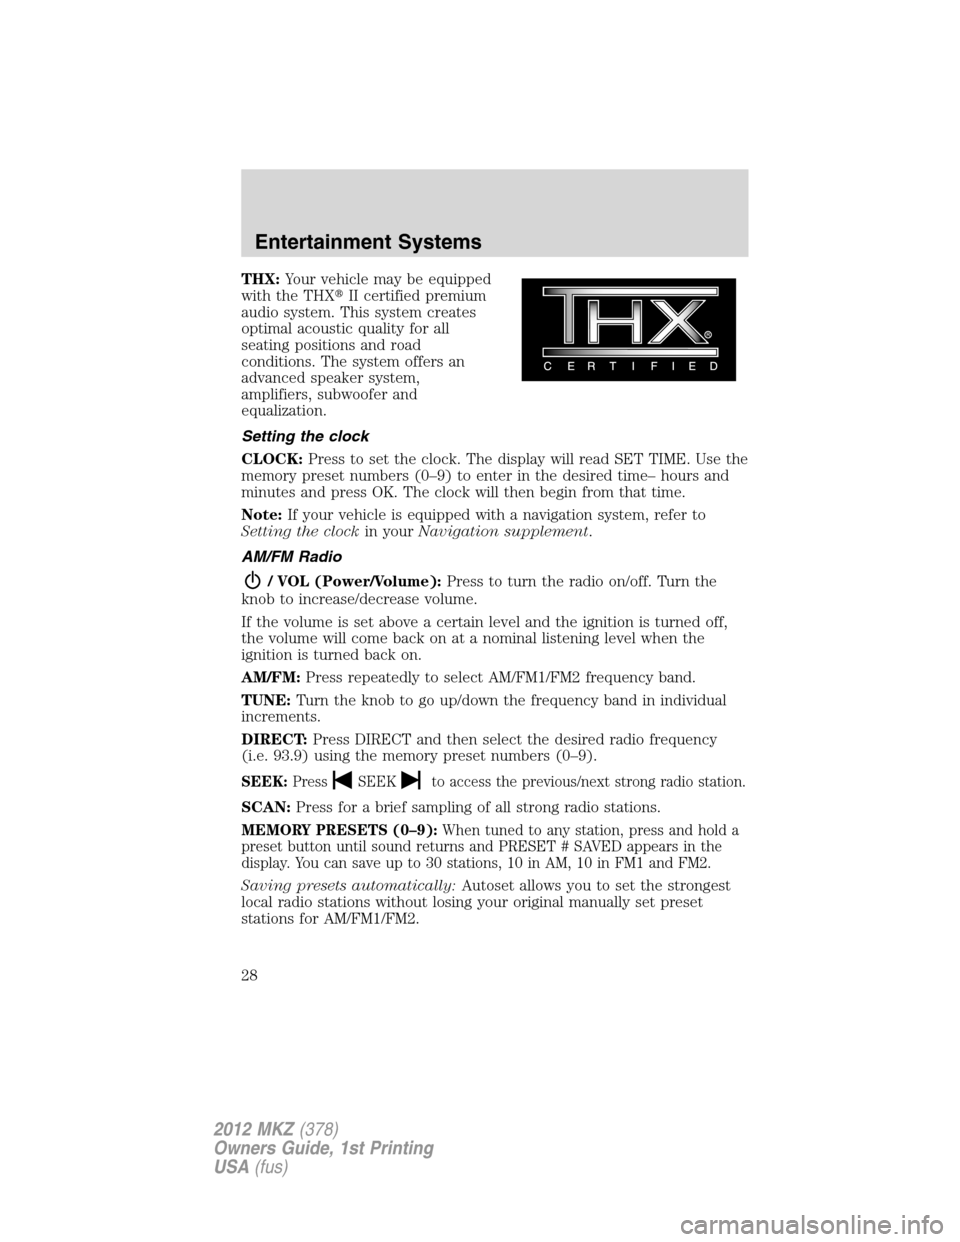 LINCOLN MKZ 2012  Owners Manual THX:Your vehicle may be equipped
with the THXII certified premium
audio system. This system creates
optimal acoustic quality for all
seating positions and road
conditions. The system offers an
advanc